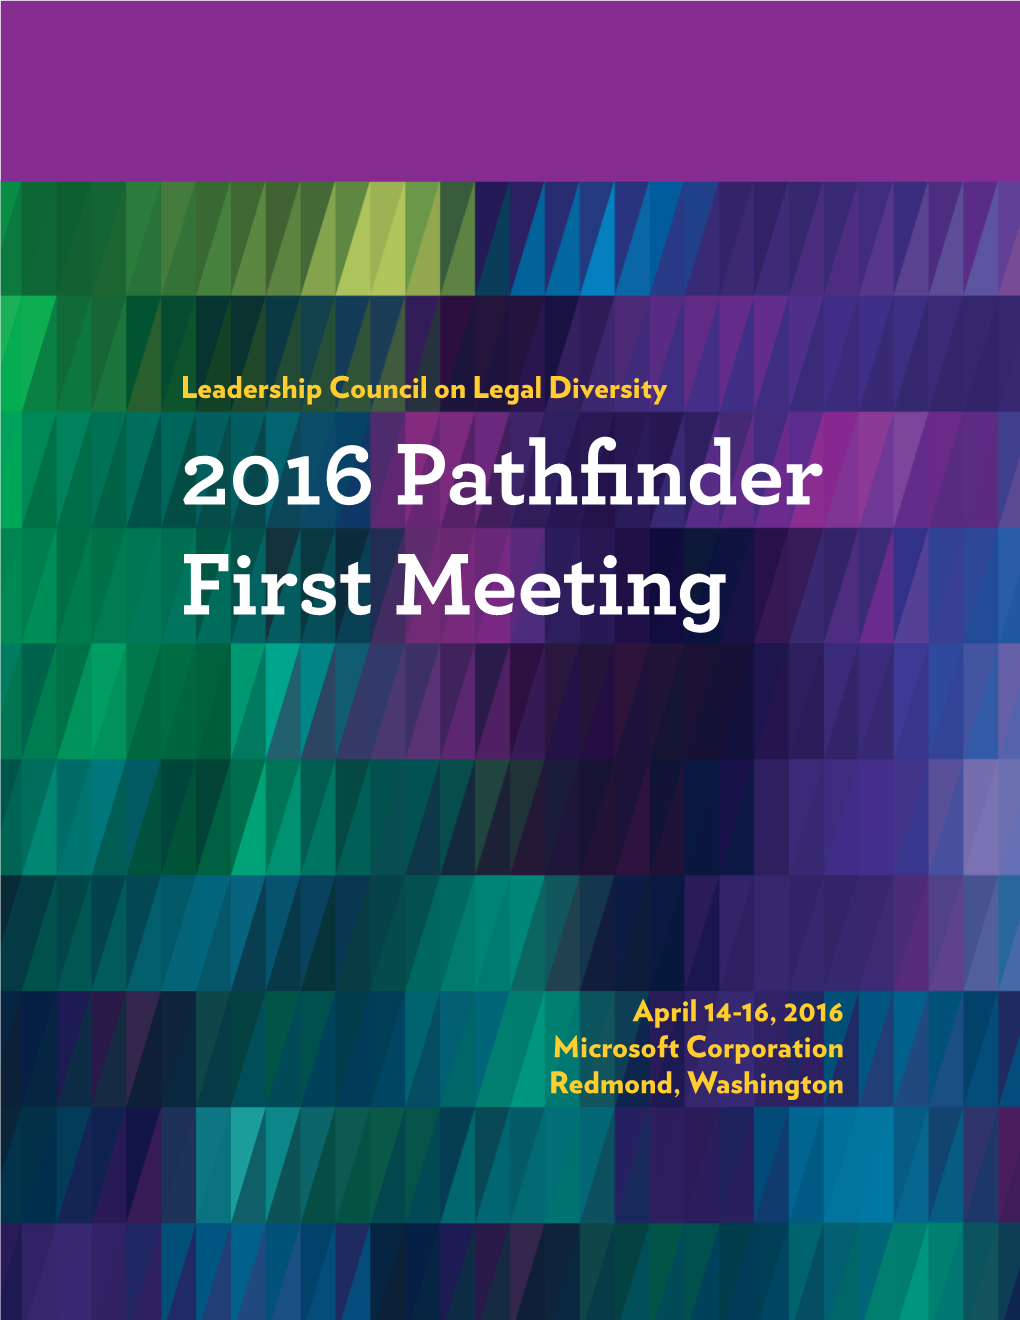 Leadership Council on Legal Diversity 2016 Pathfinder First Meeting